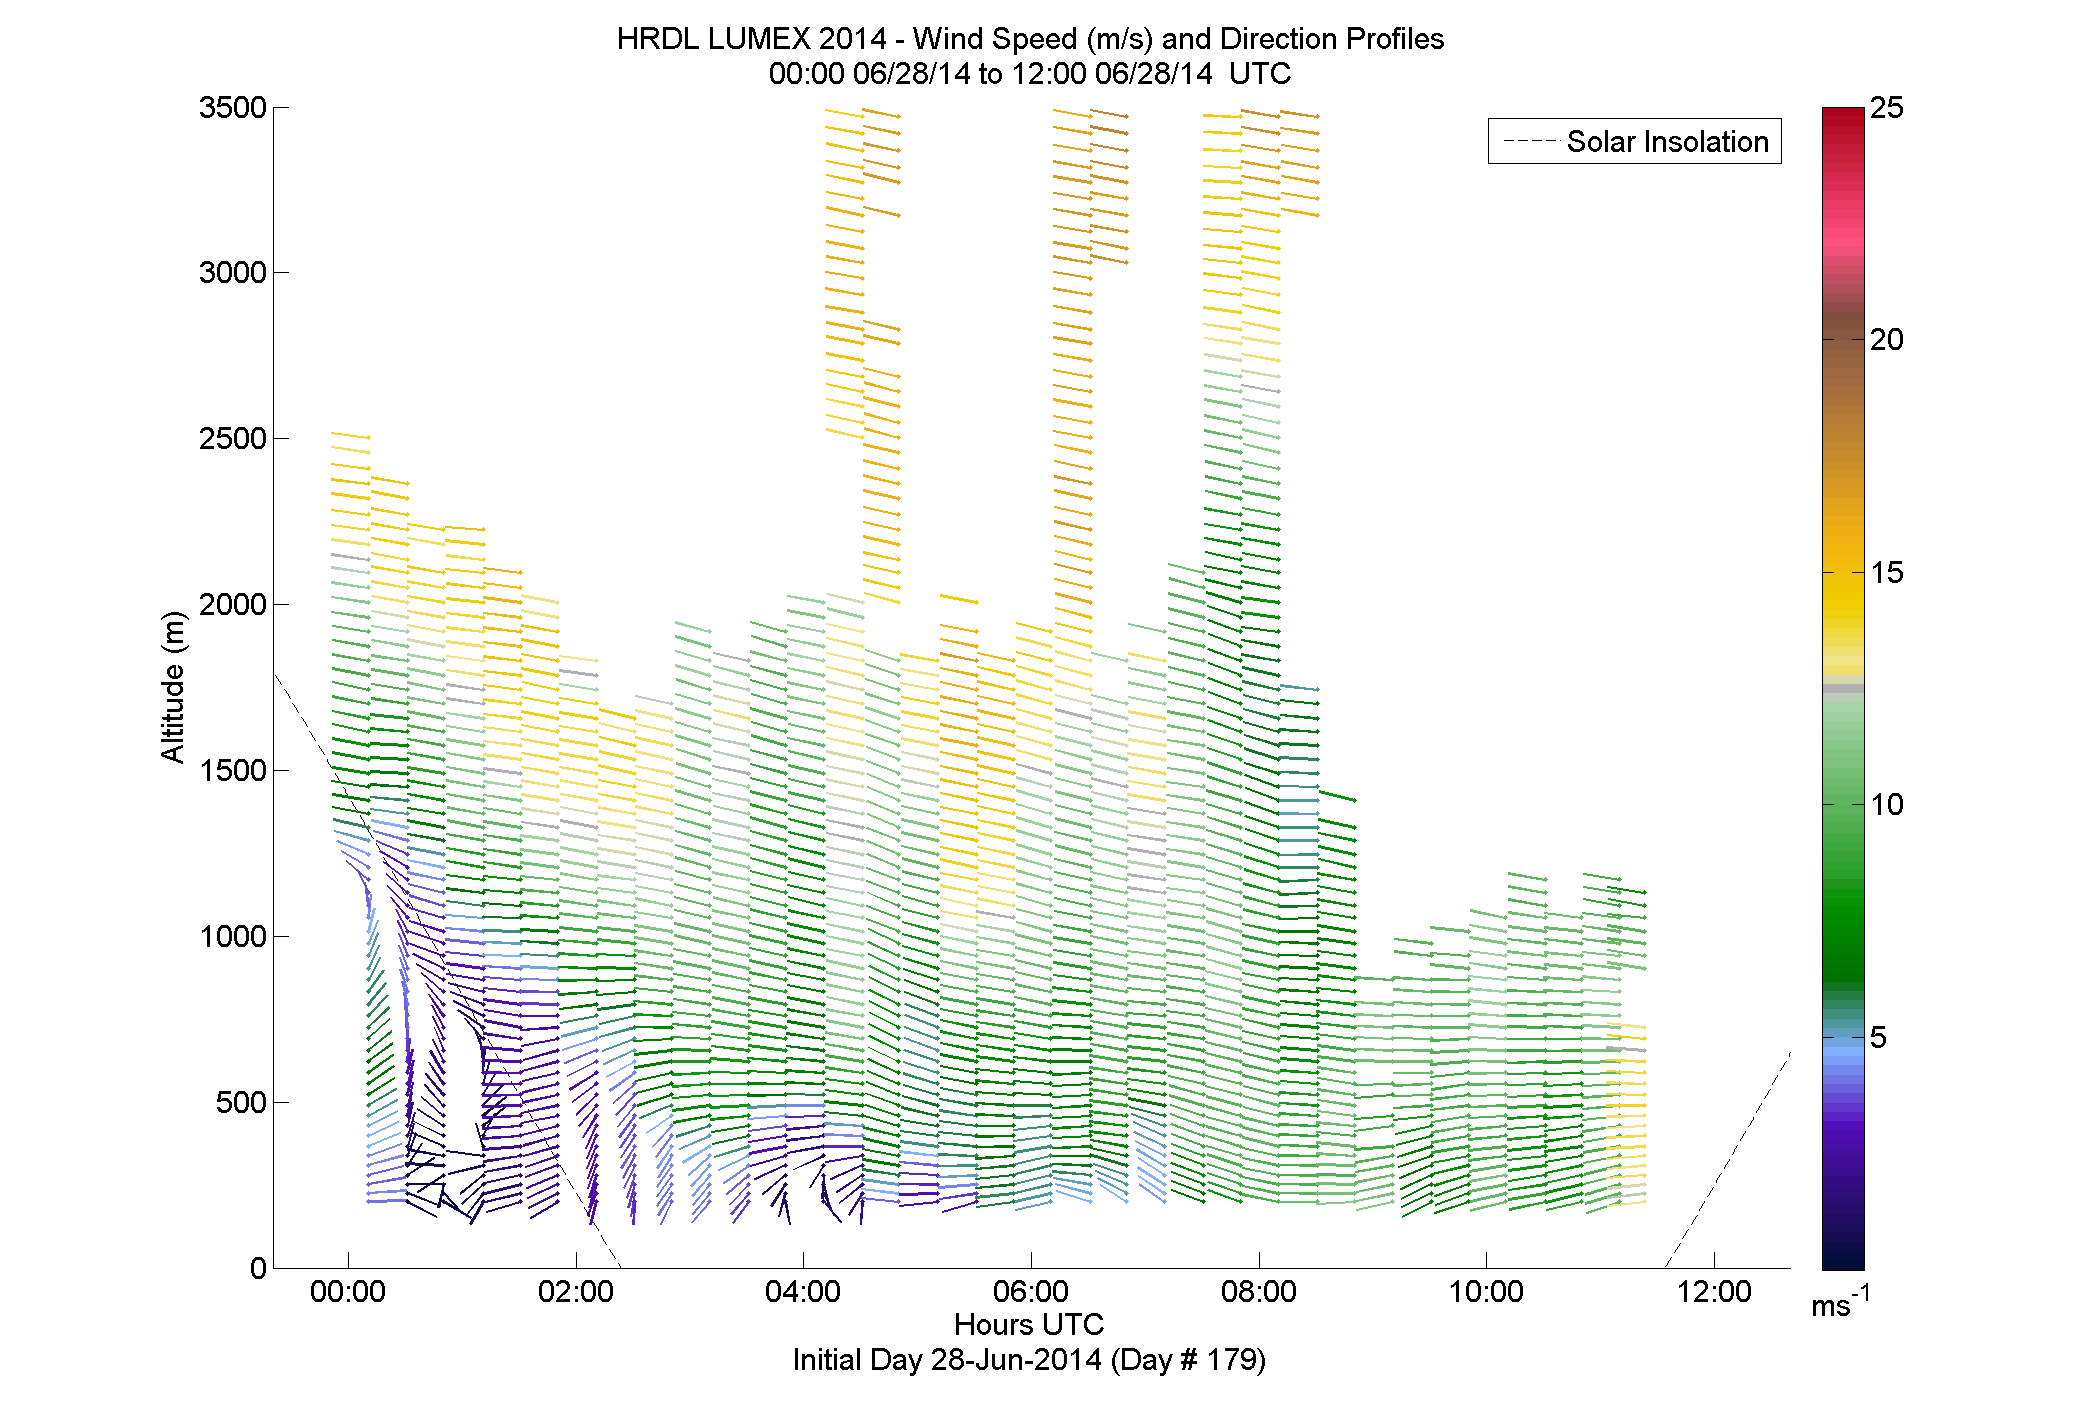 HRDL speed and direction profile - June 28 am